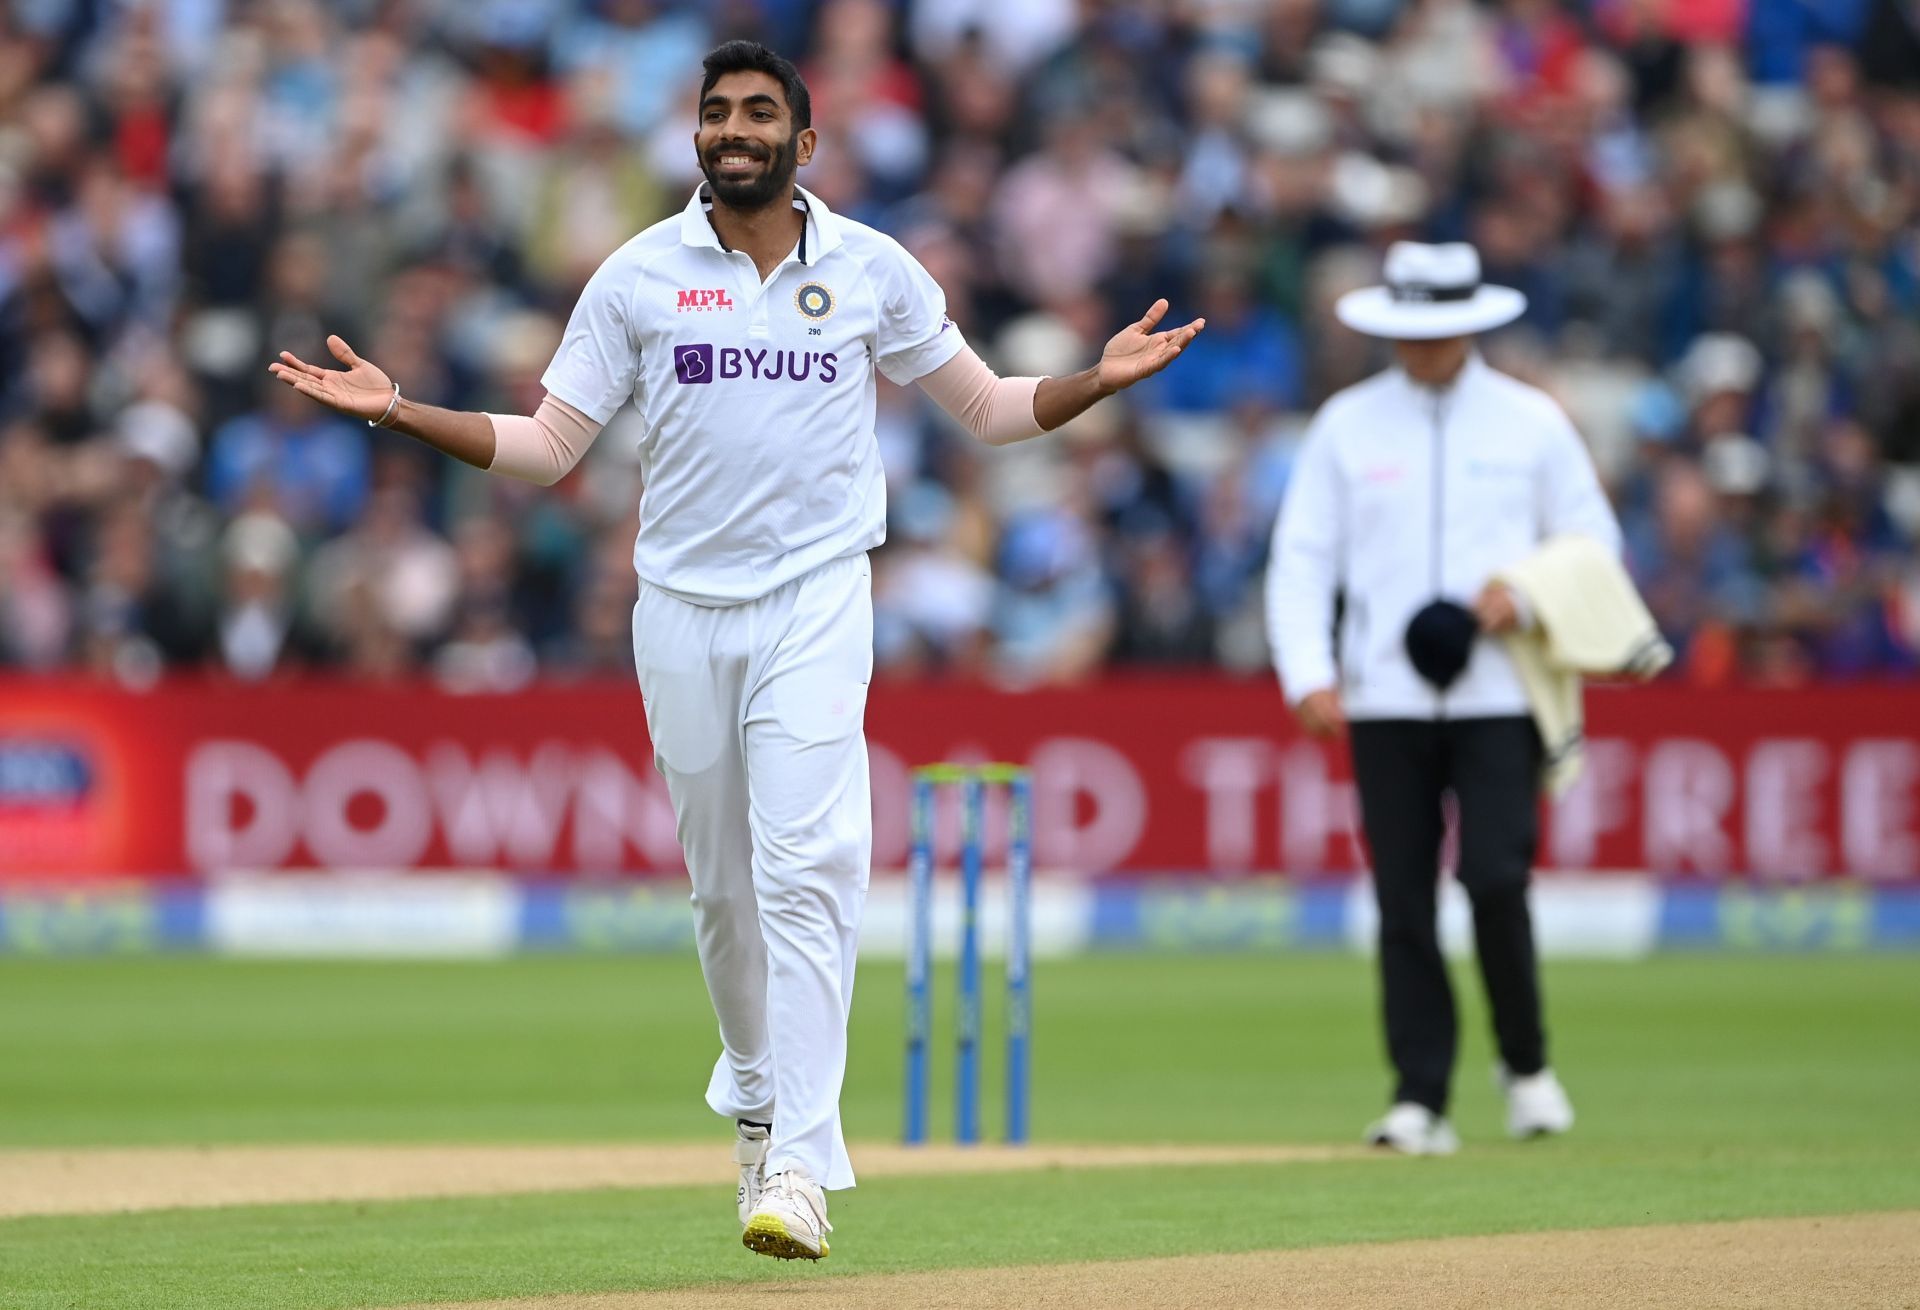 Jasprit Bumrah is ranked third in ICC Test bowling rankings. (Credits: Getty)